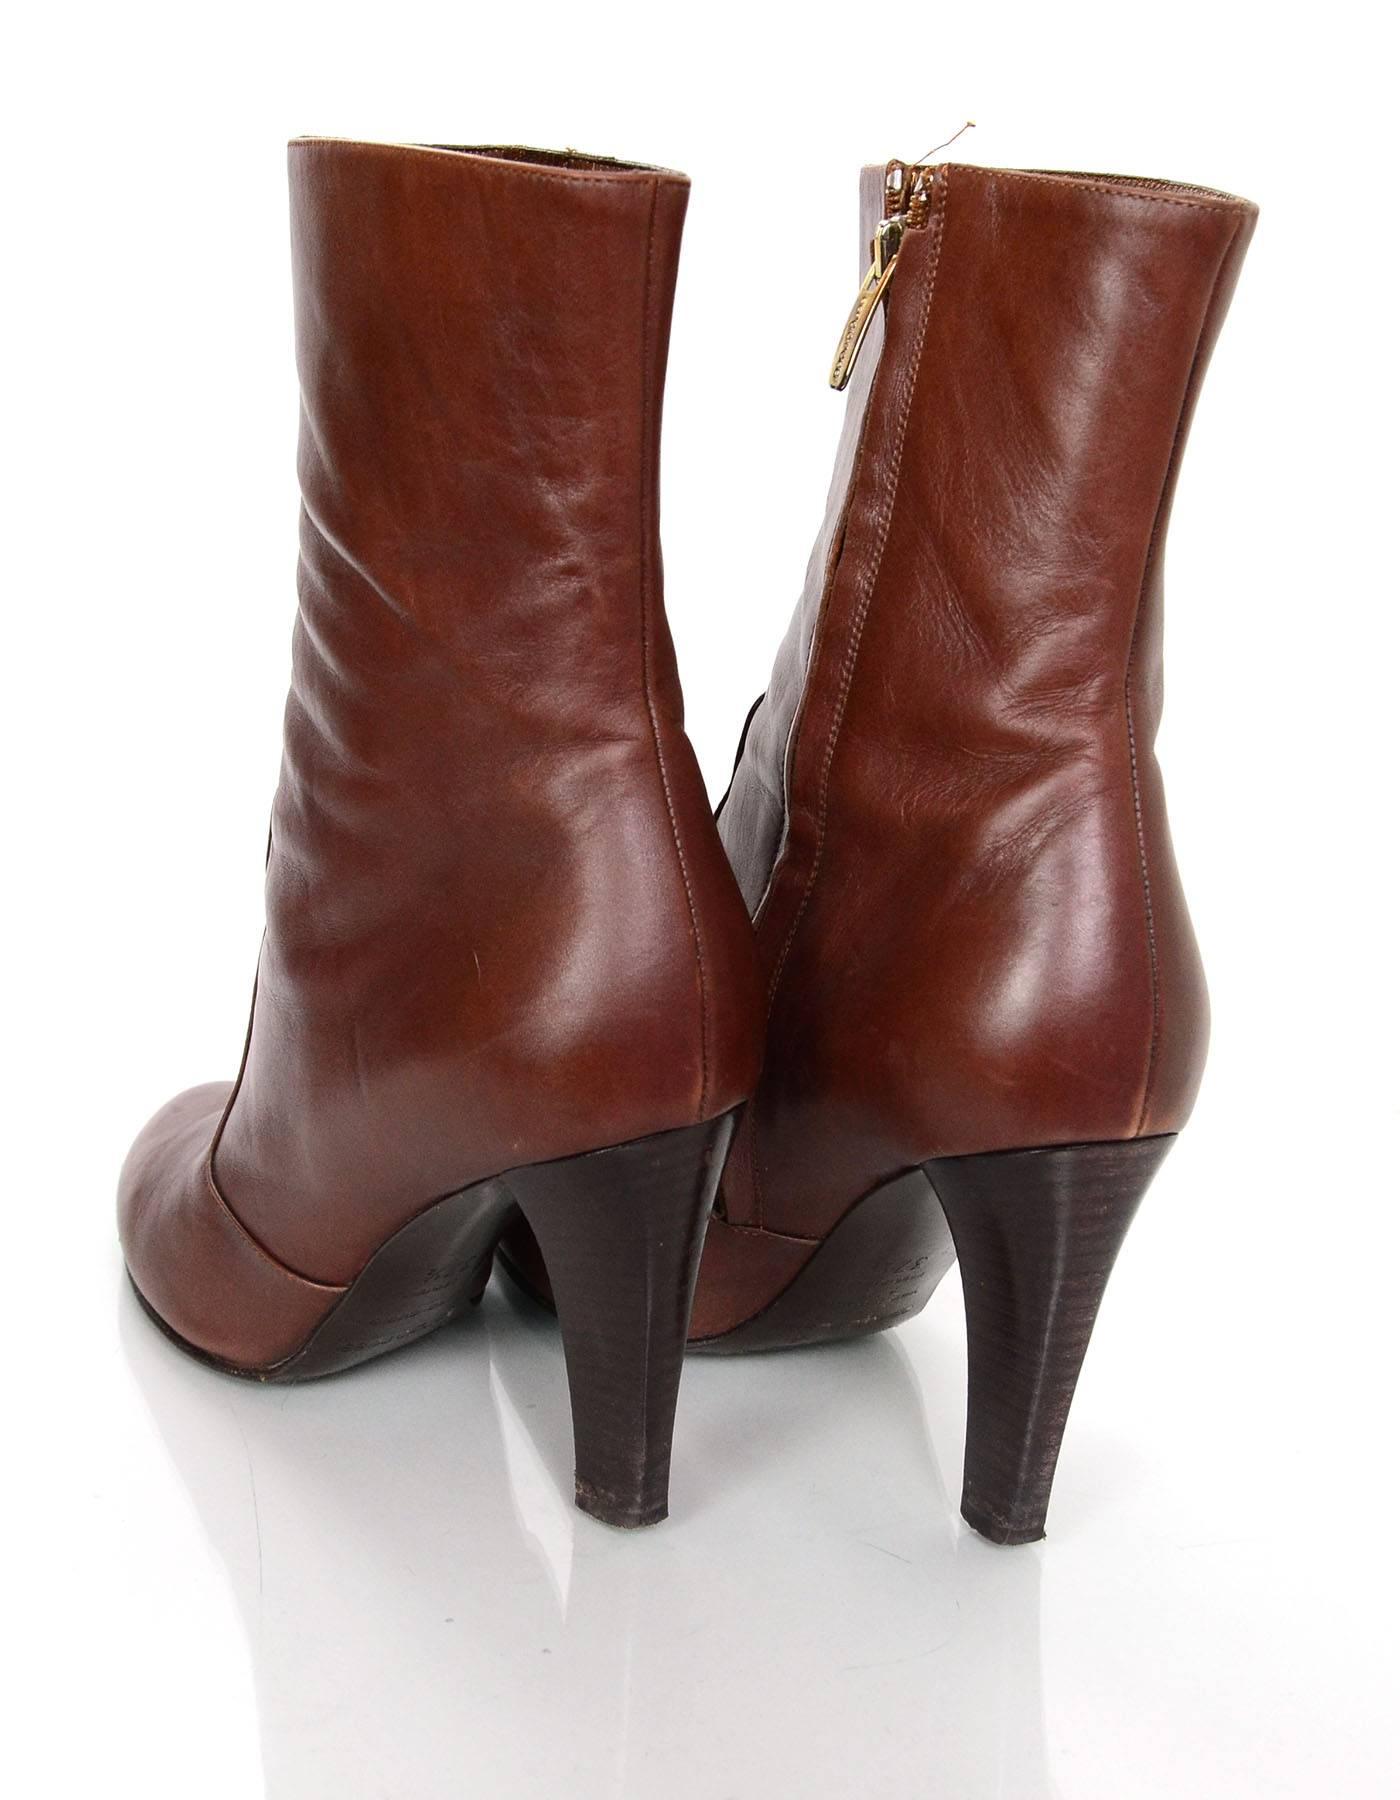 Sergio Rossi Brown Leather Ankle Boots sz 37.5 rt. $675 2